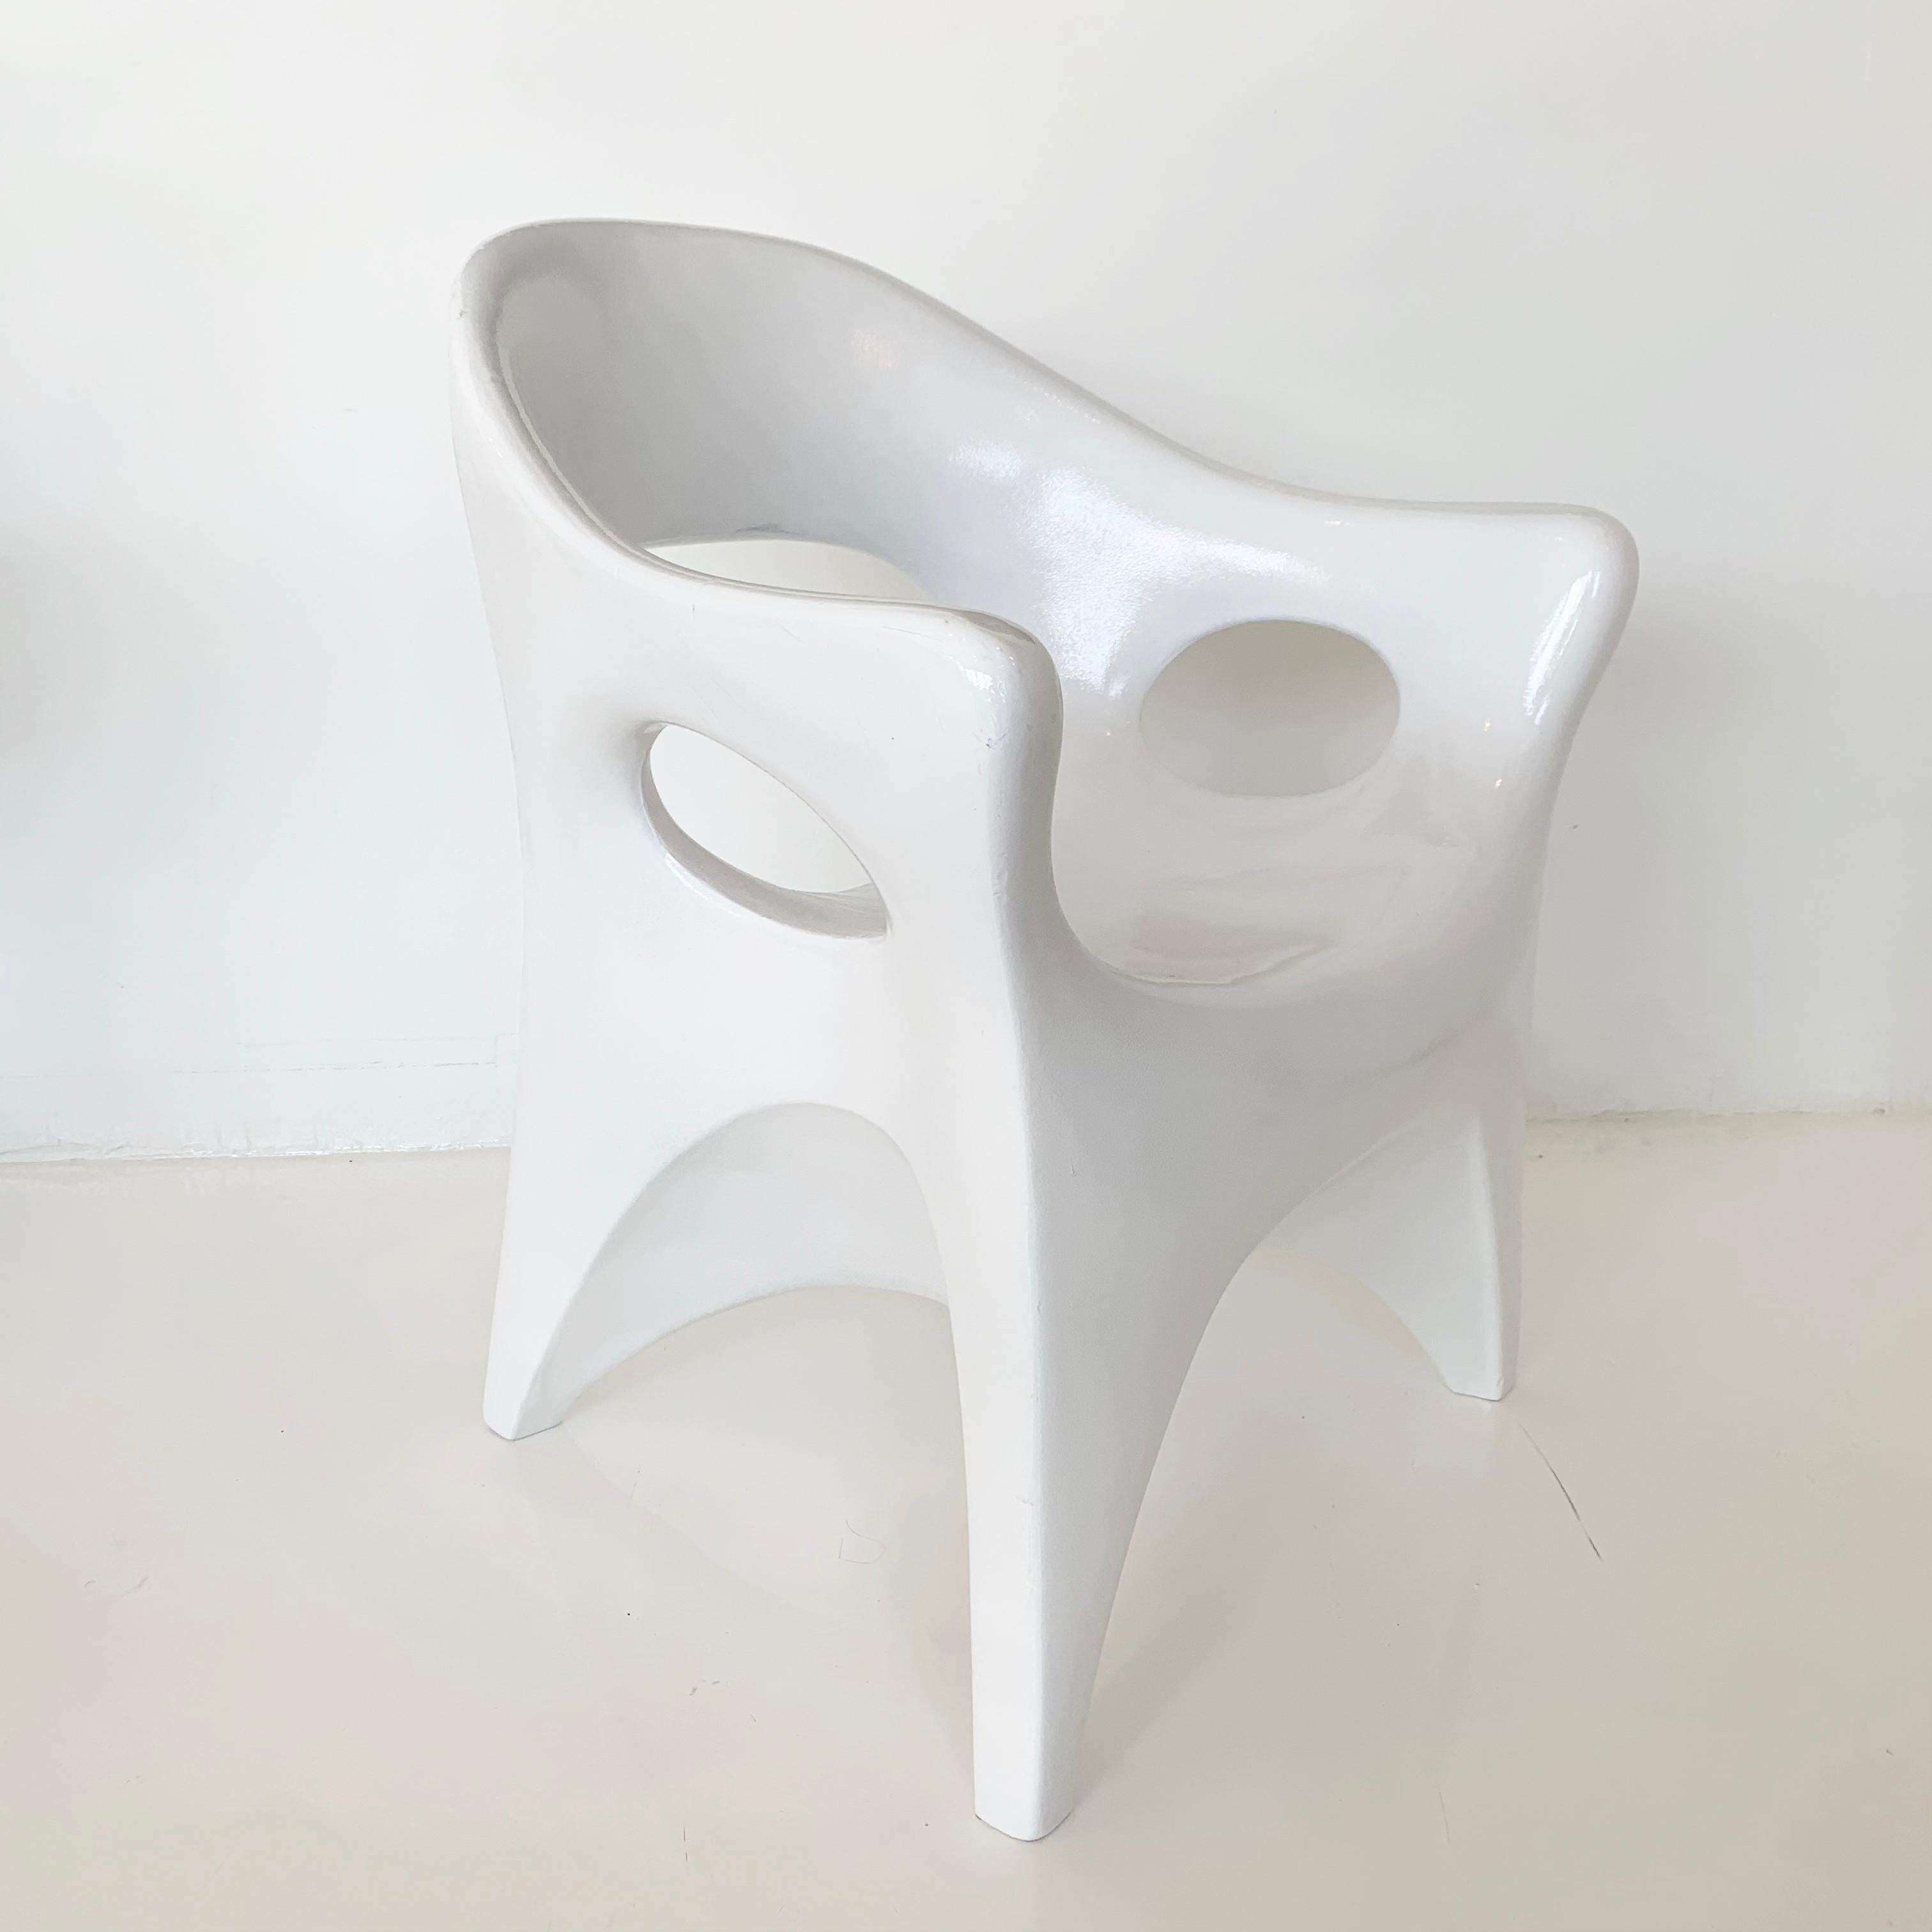 Set of 4 Sculptural Plastic Chairs by John Gale, 1963 For Sale 5